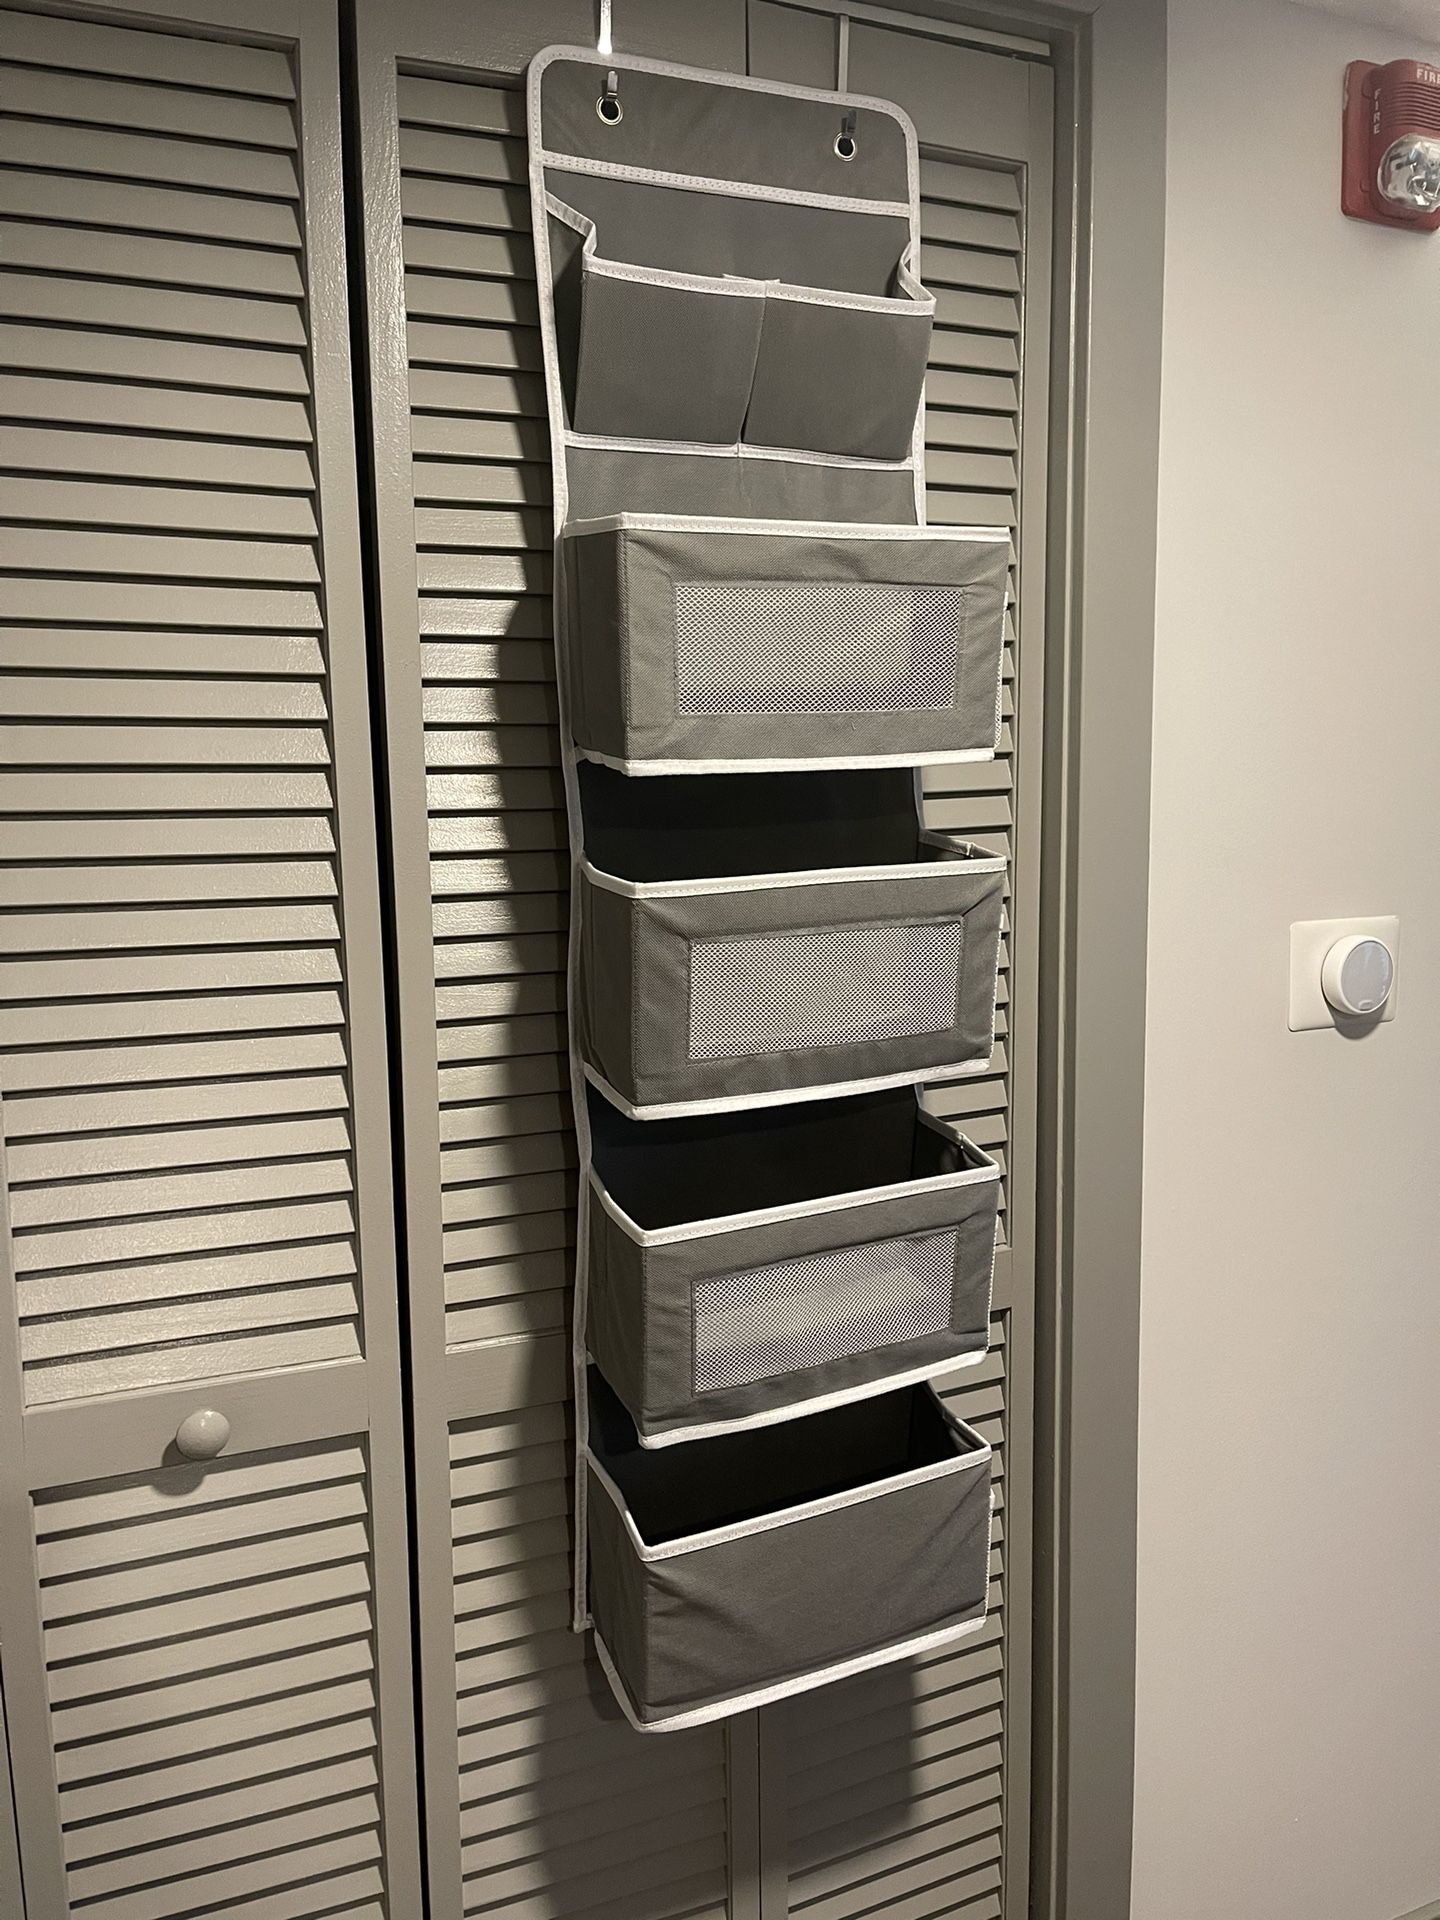 Hanging Closet Laundry Organizer - Storage Mesh Pockets - Clean, Barely Used